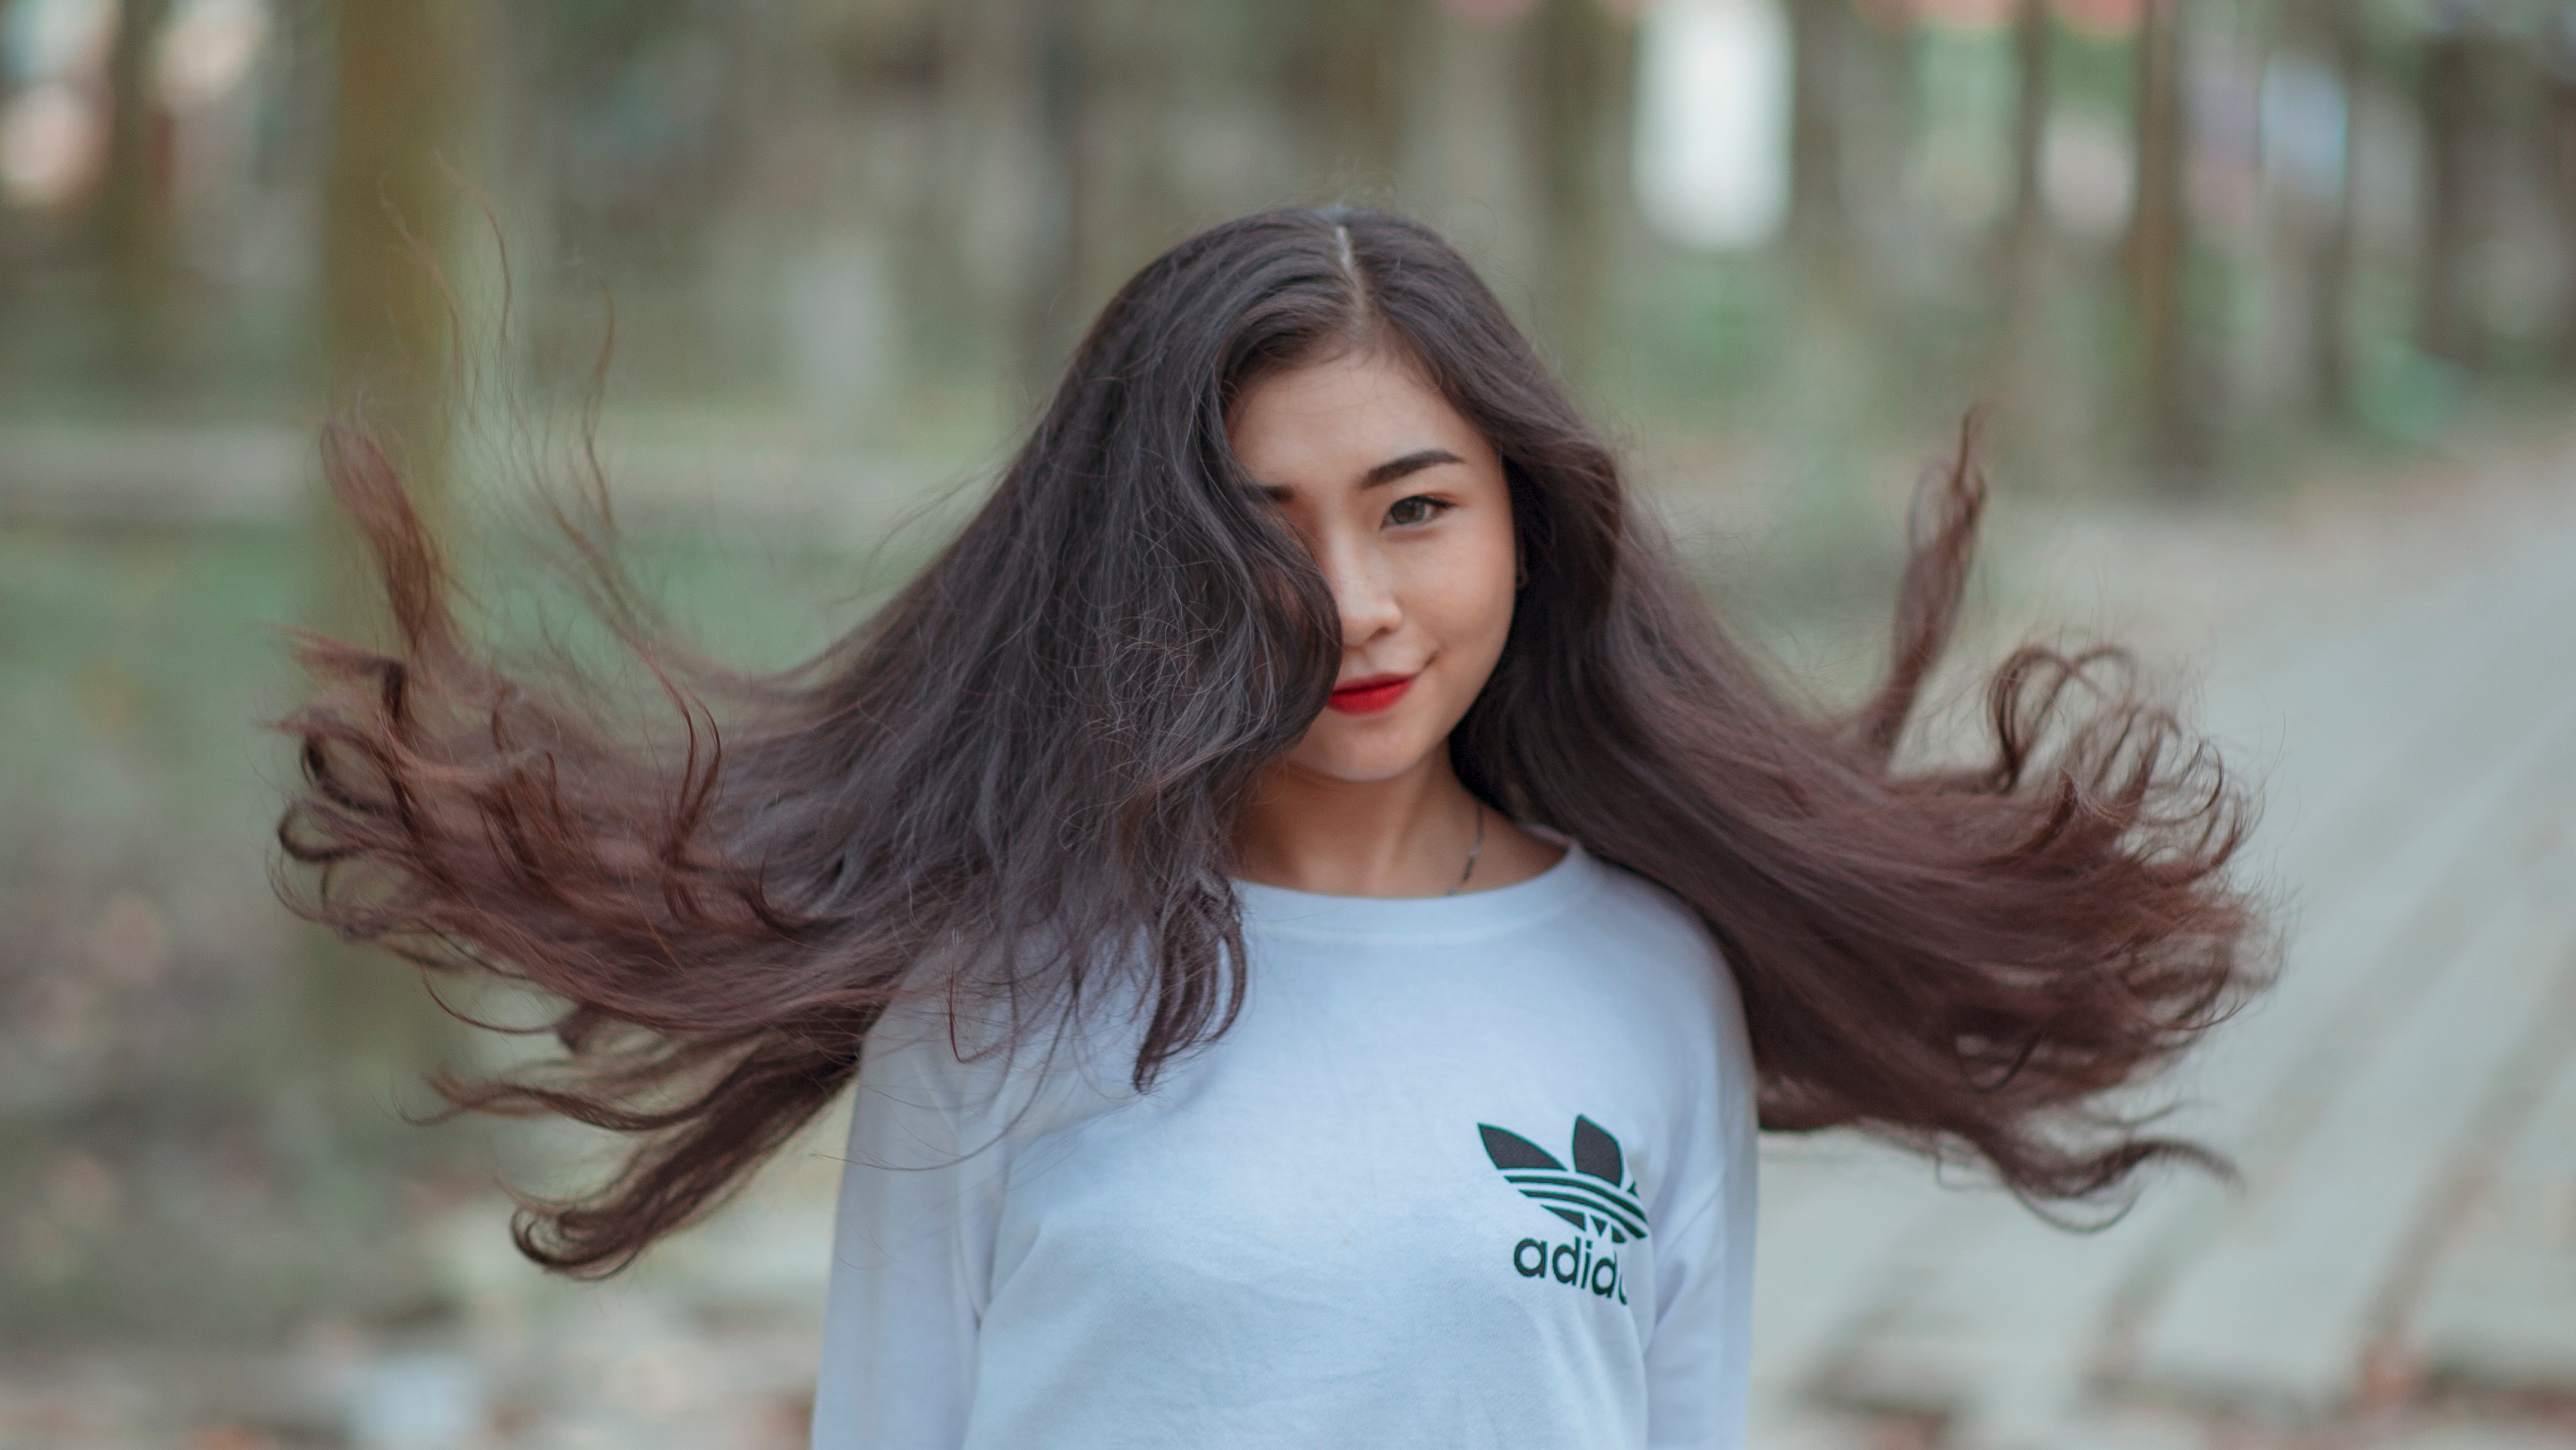 Woman with long hair waving on air and wearing white adidas shirt photo